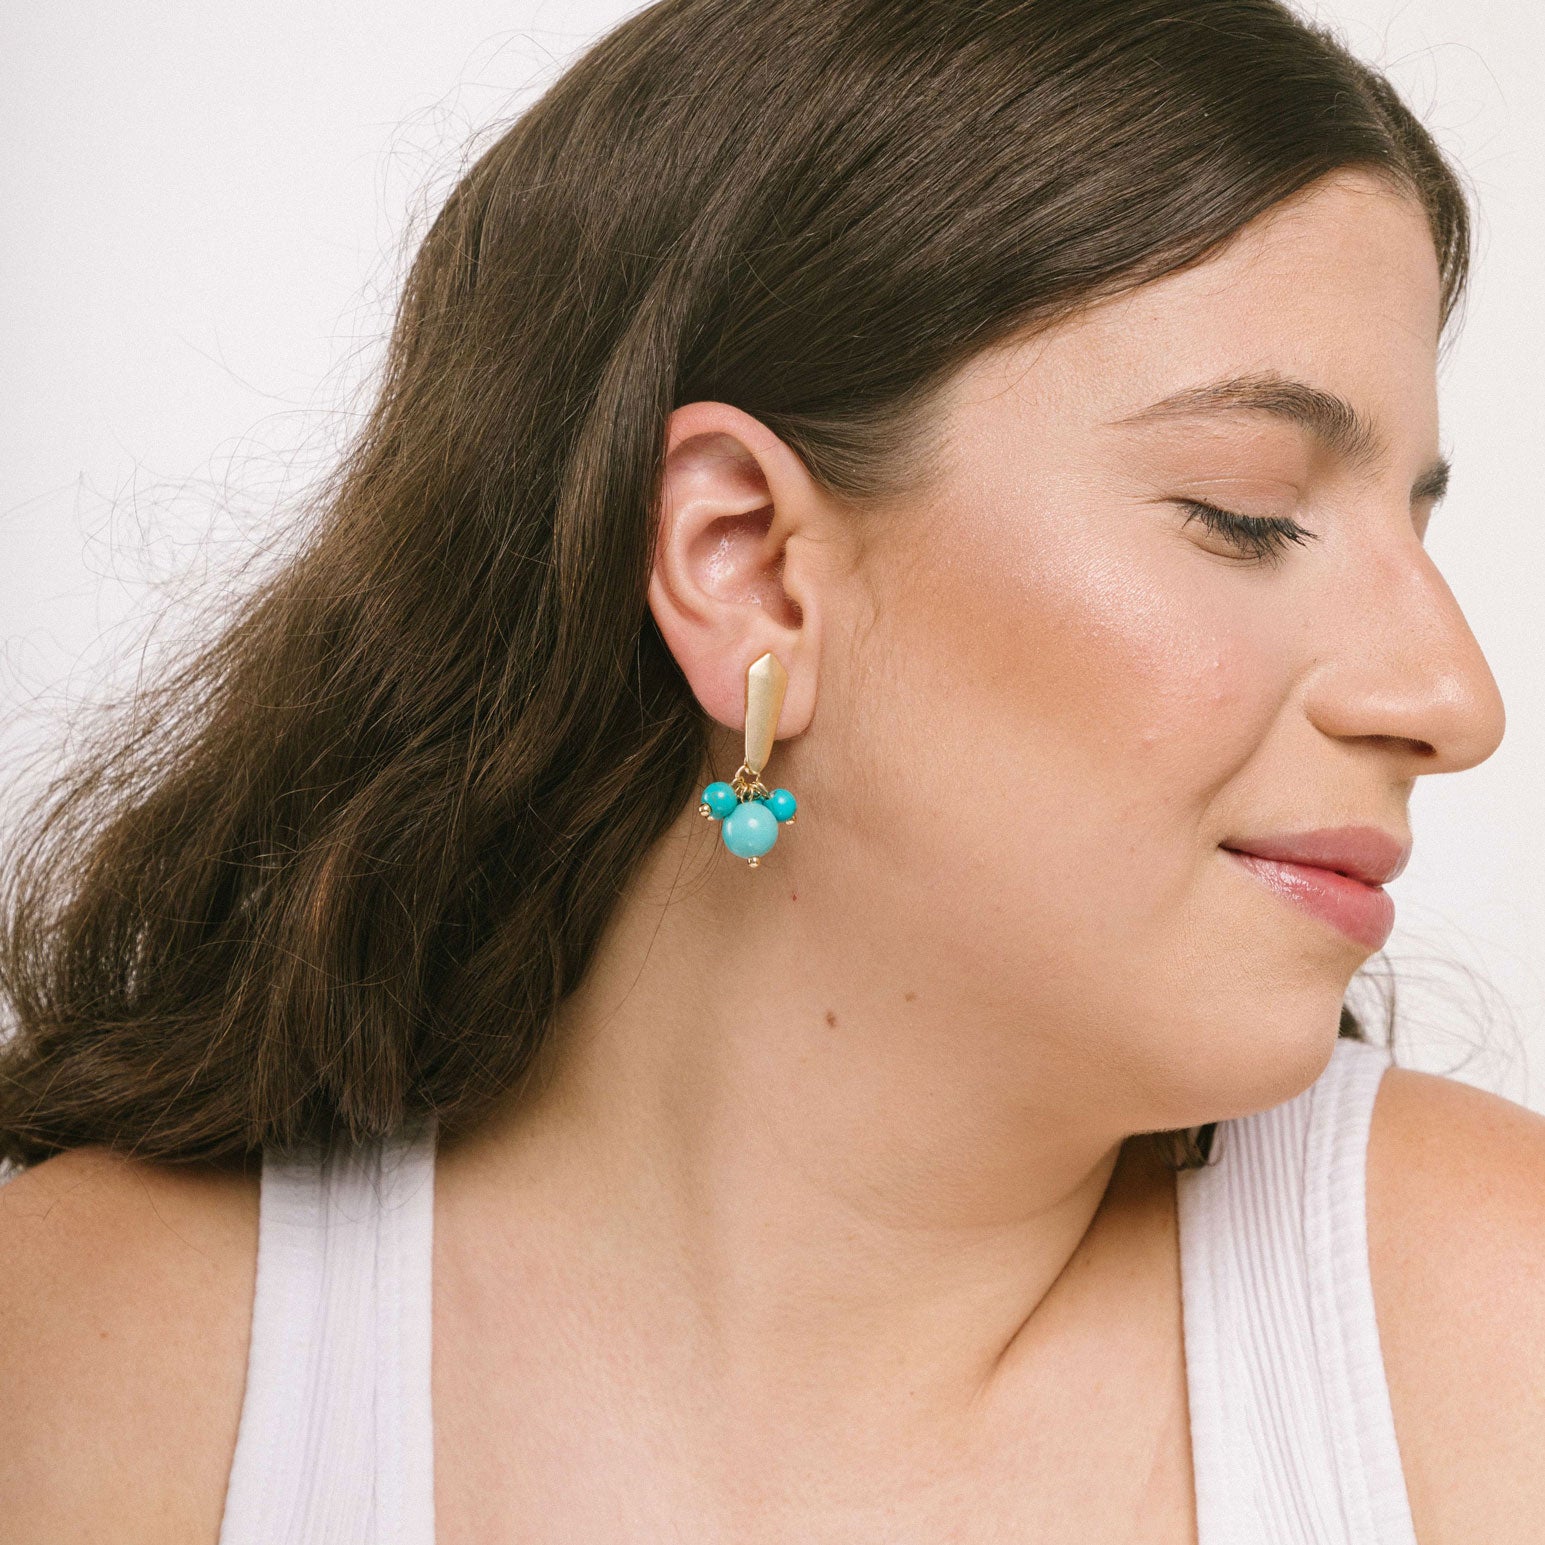 Captivating light blue clip-on earrings suitable for all ear types. These stylish earrings are made of matte gold tone copper alloy, agate, and glass bead. Secure hold with the Clip-On style and removable rubber padding.